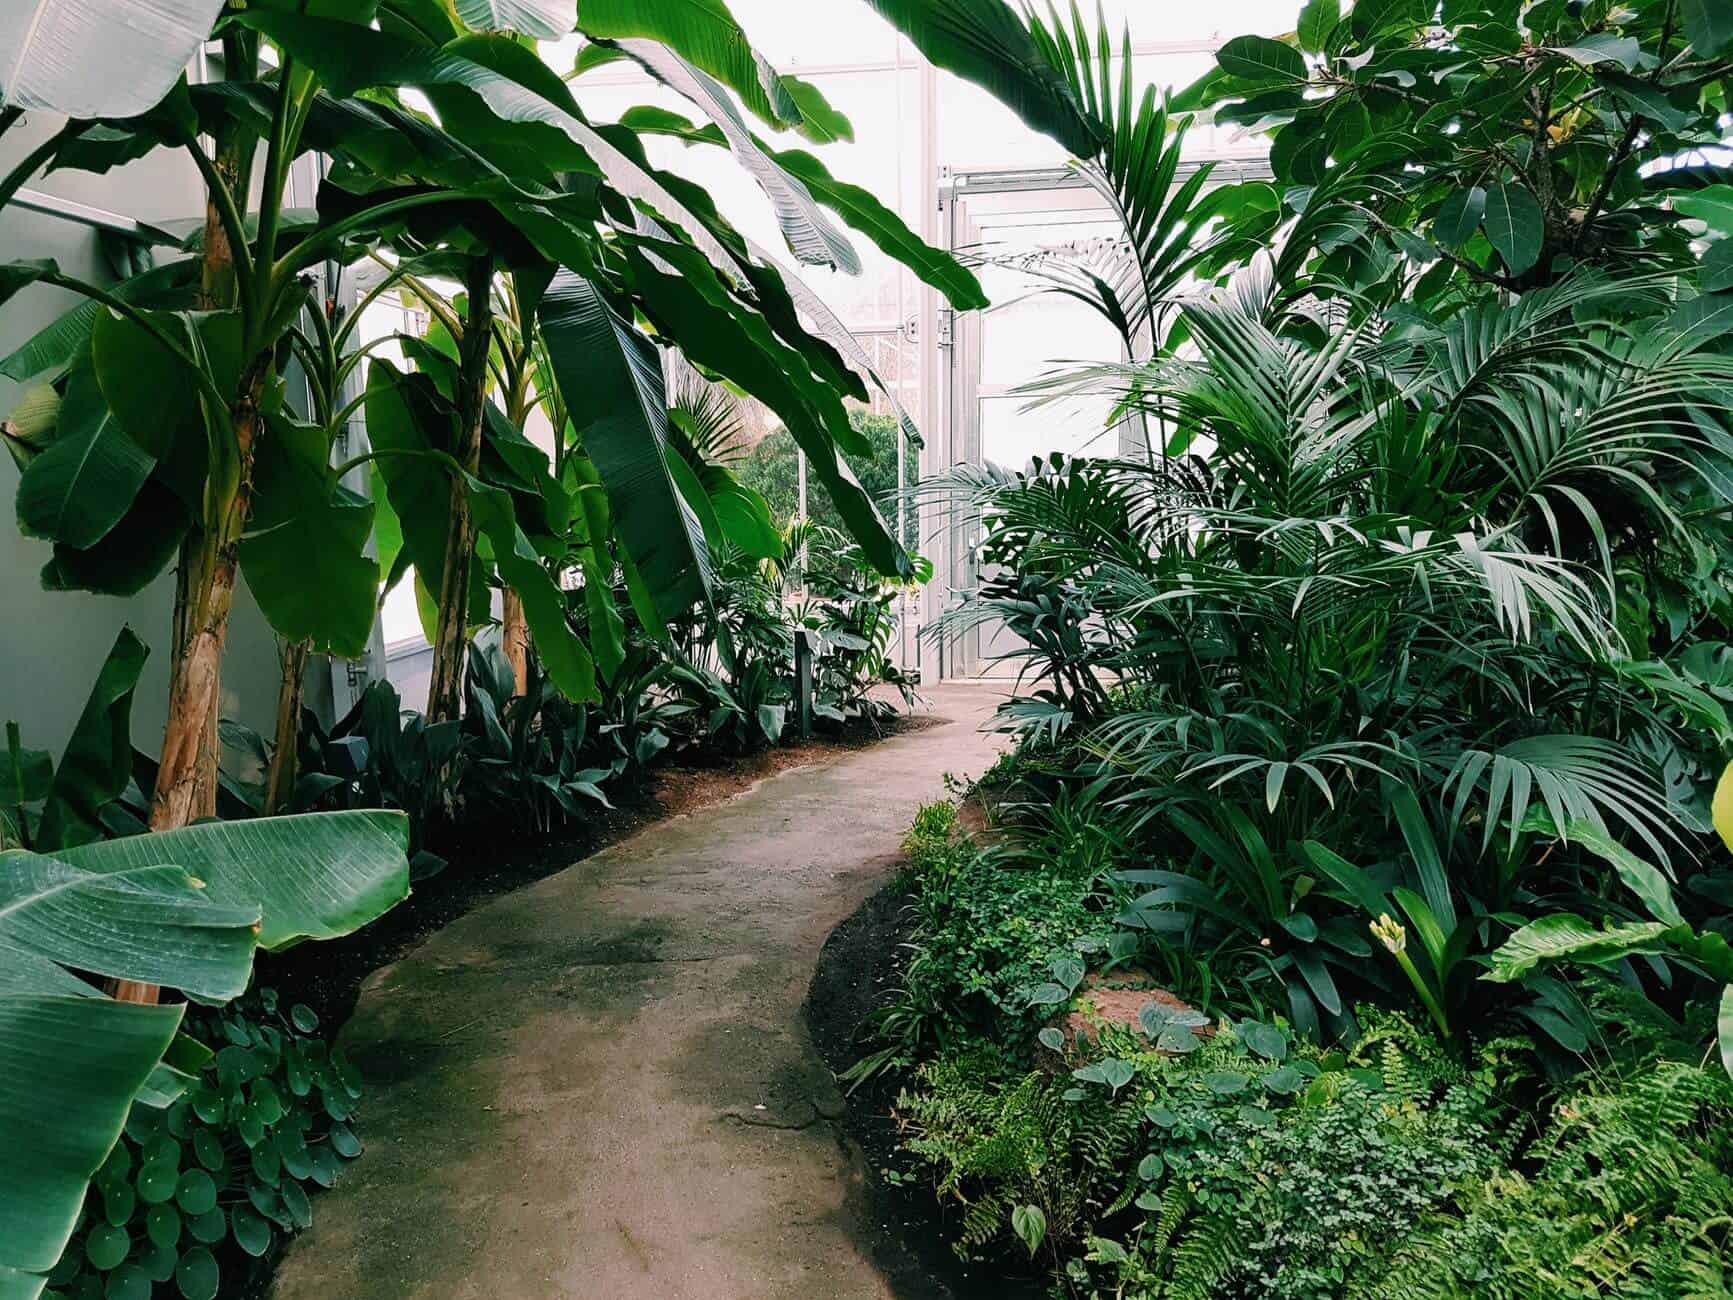 Plants and trees in a greenhouse with an alley in the middle